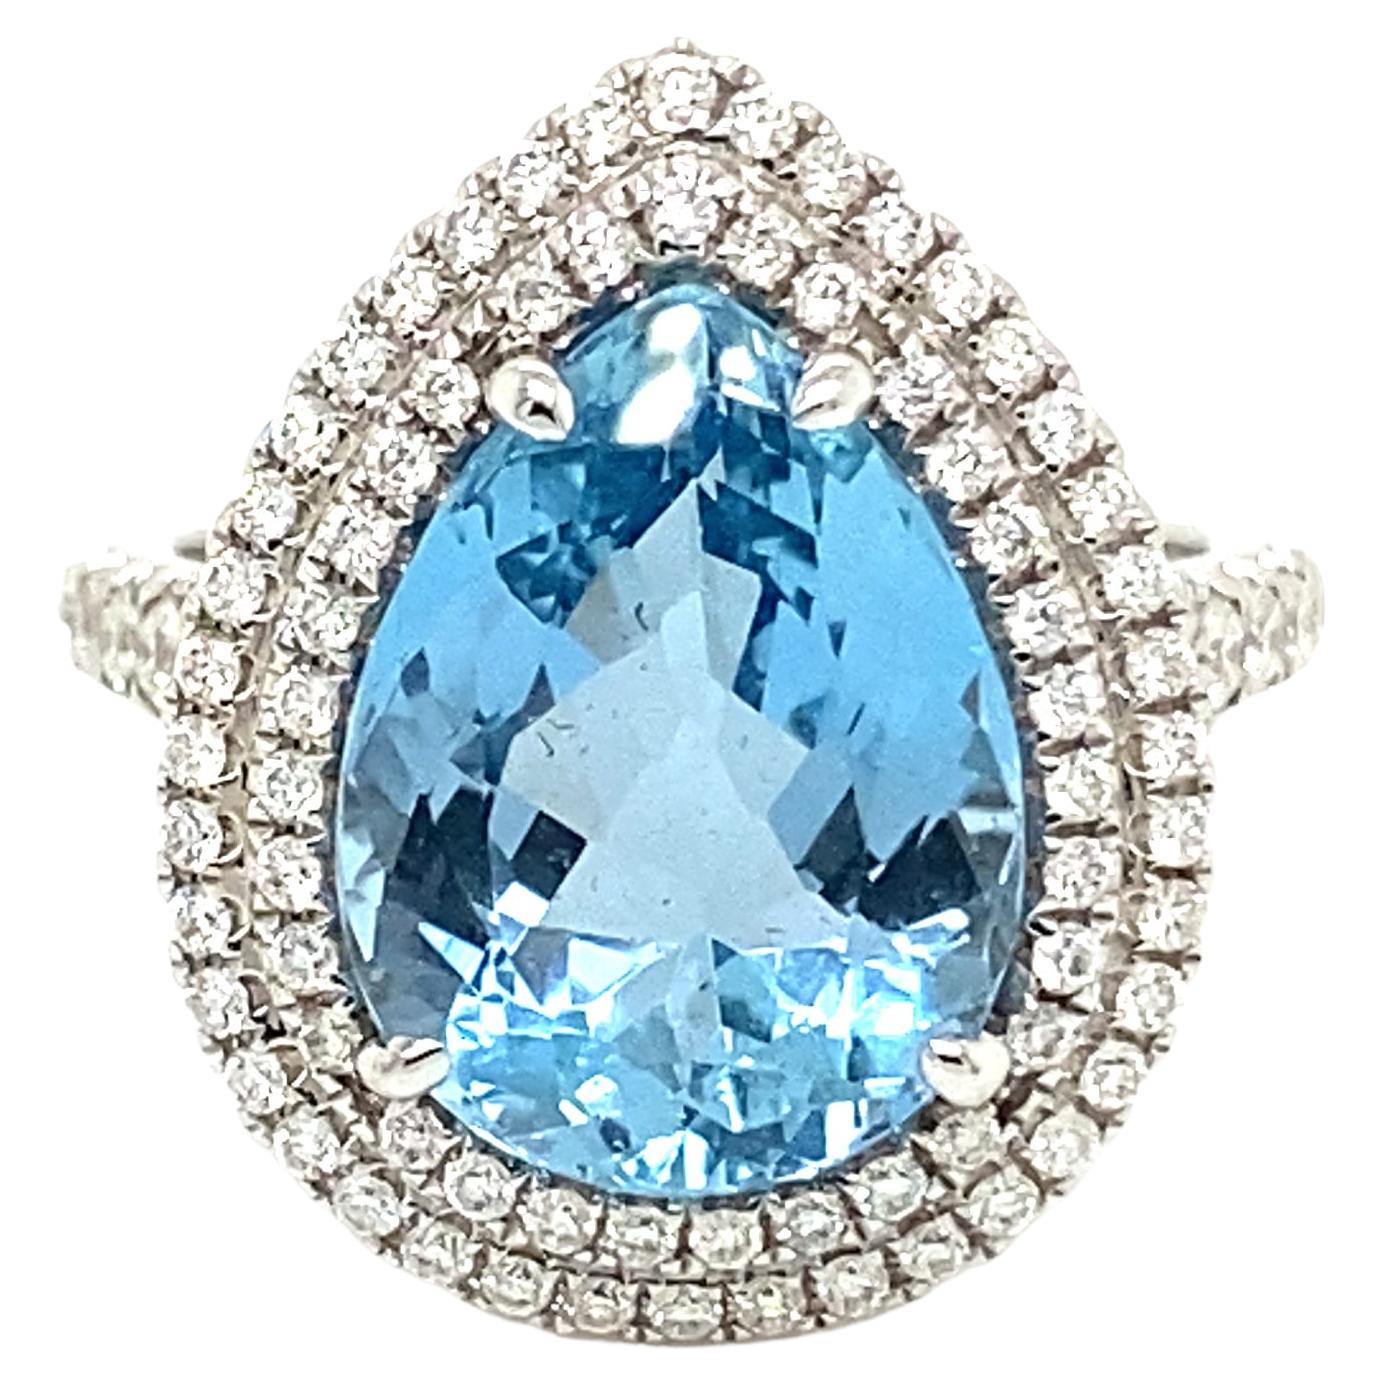 4.82 Carat Pear Shape Aquamarine and Diamond Cocktail Ring For Sale